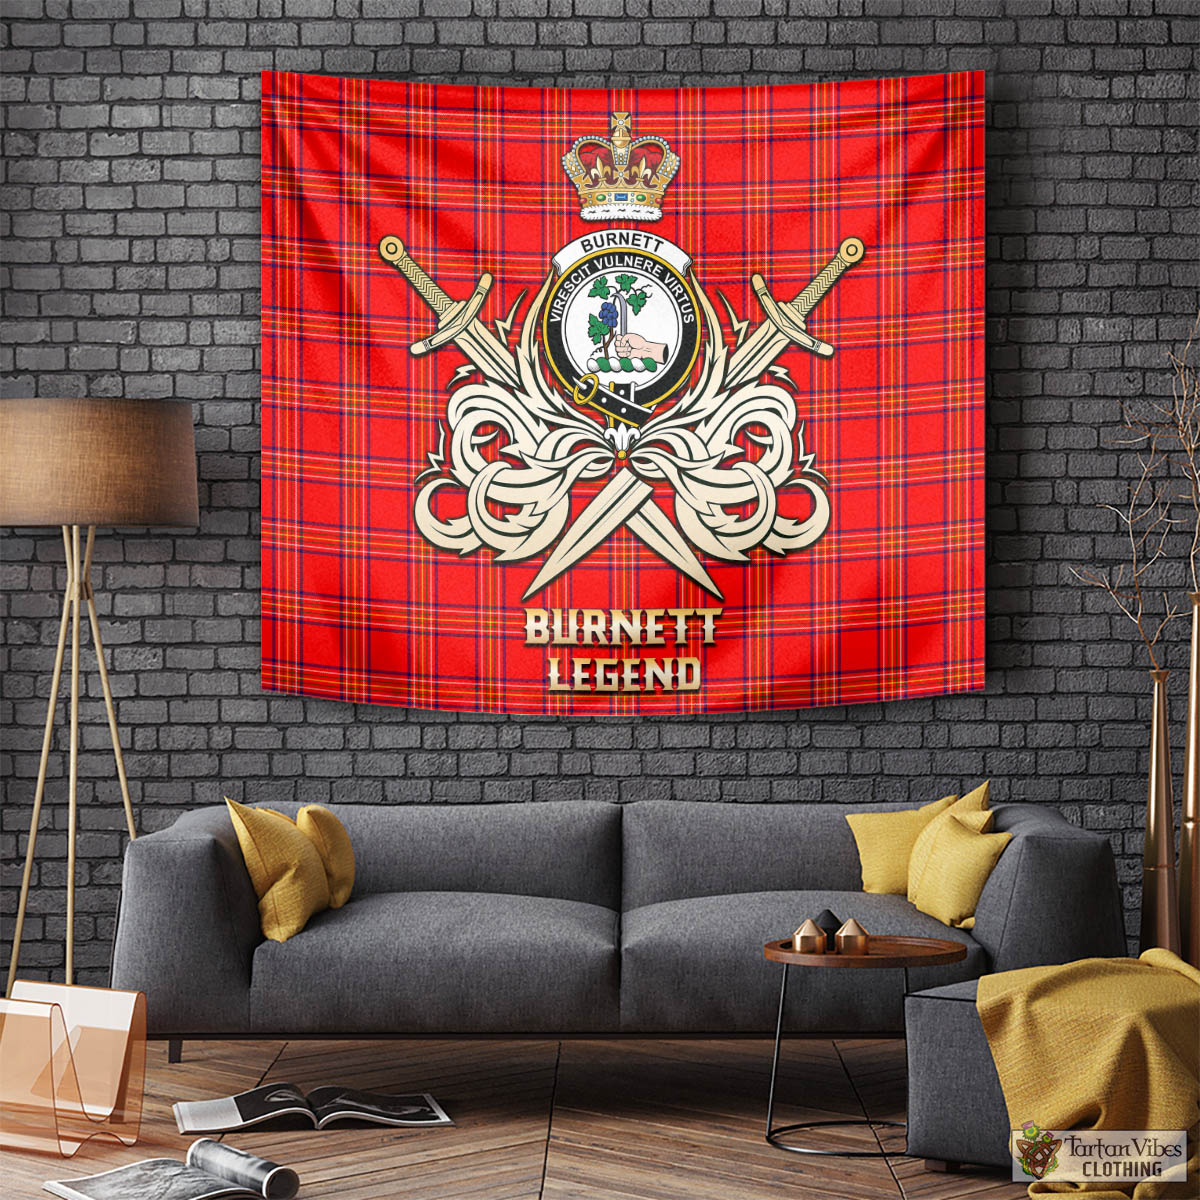 Tartan Vibes Clothing Burnett Modern Tartan Tapestry with Clan Crest and the Golden Sword of Courageous Legacy